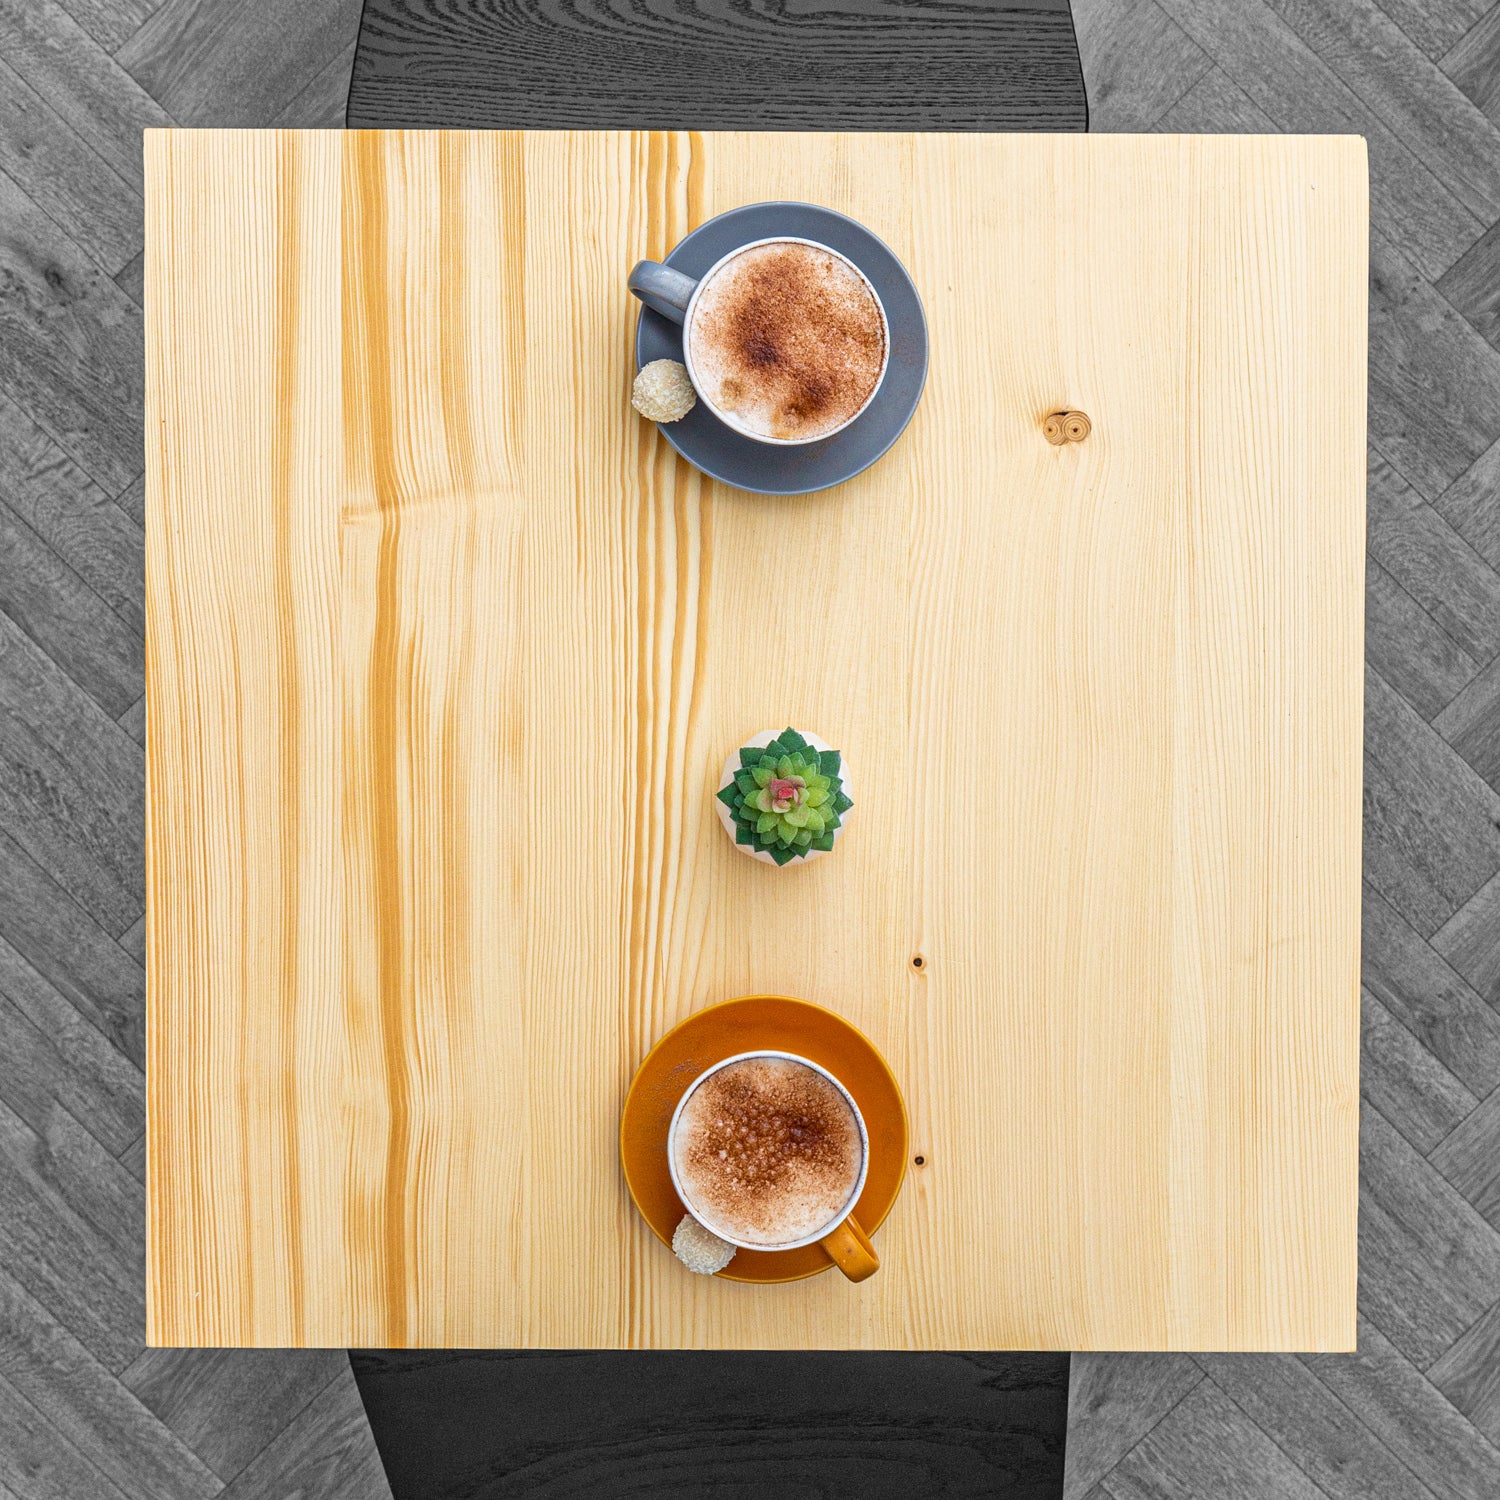 Pine Cafe Table top - Solid Wood